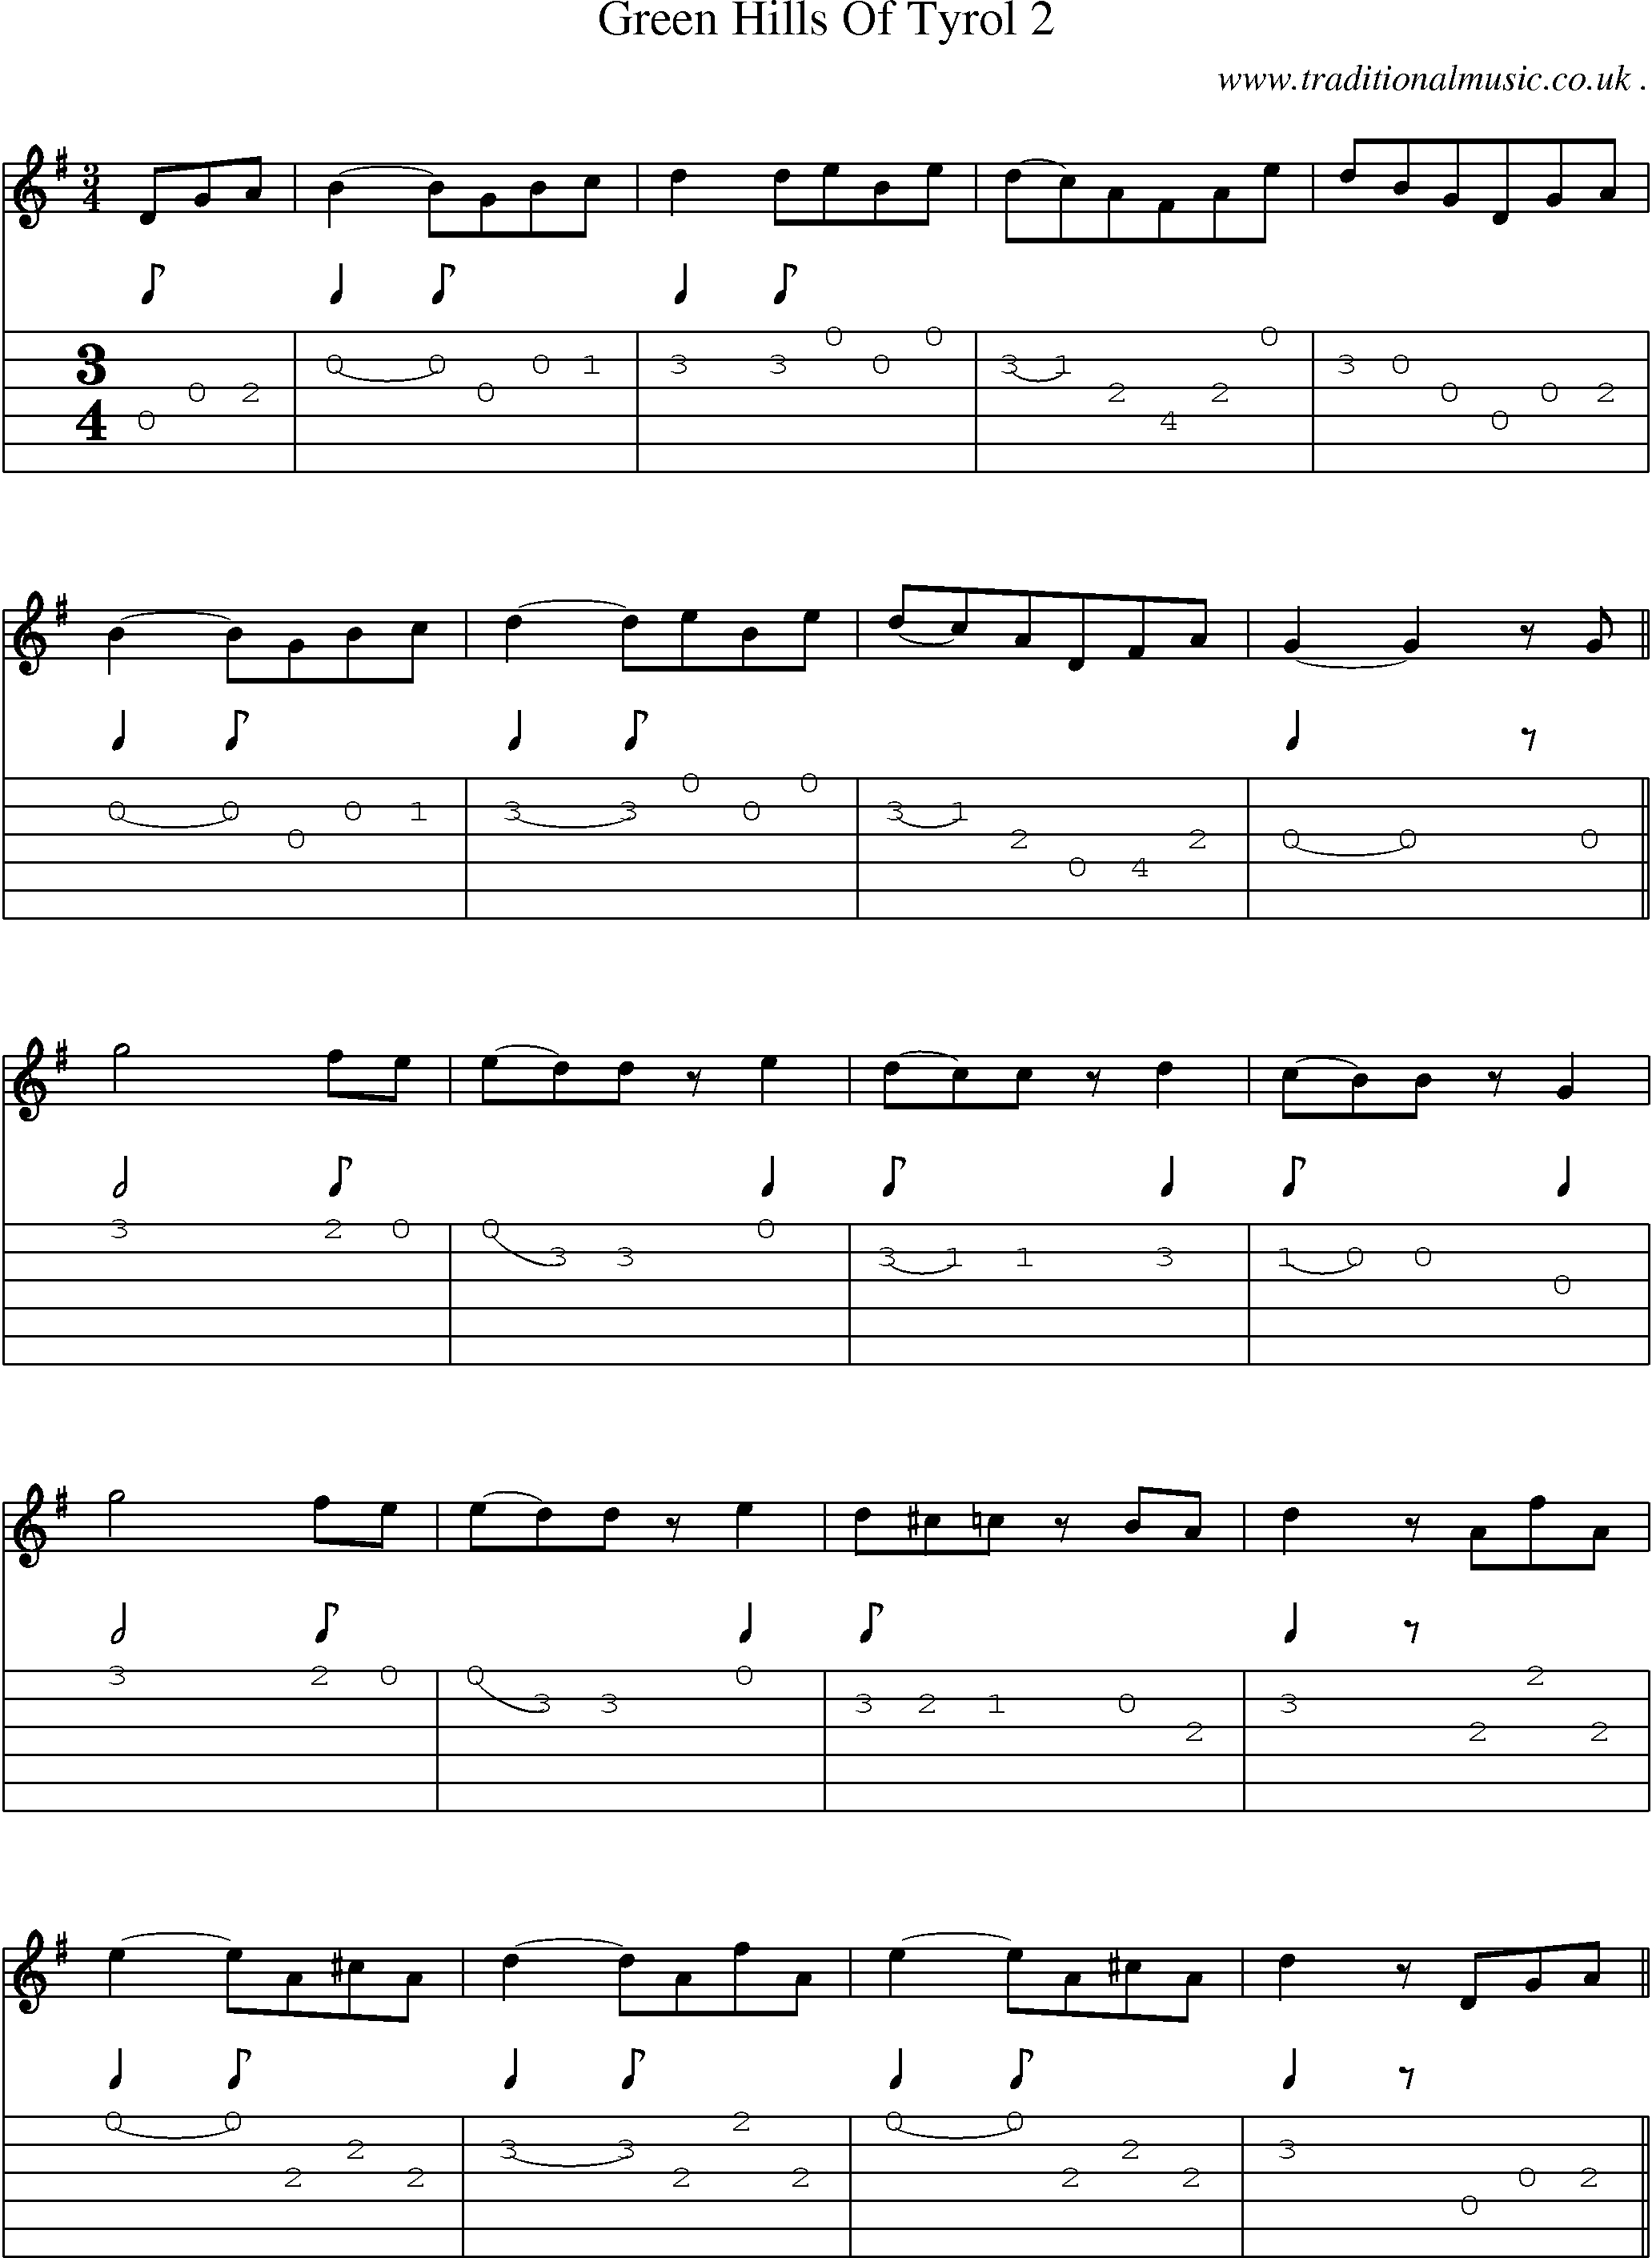 Sheet-Music and Guitar Tabs for Green Hills Of Tyrol 2